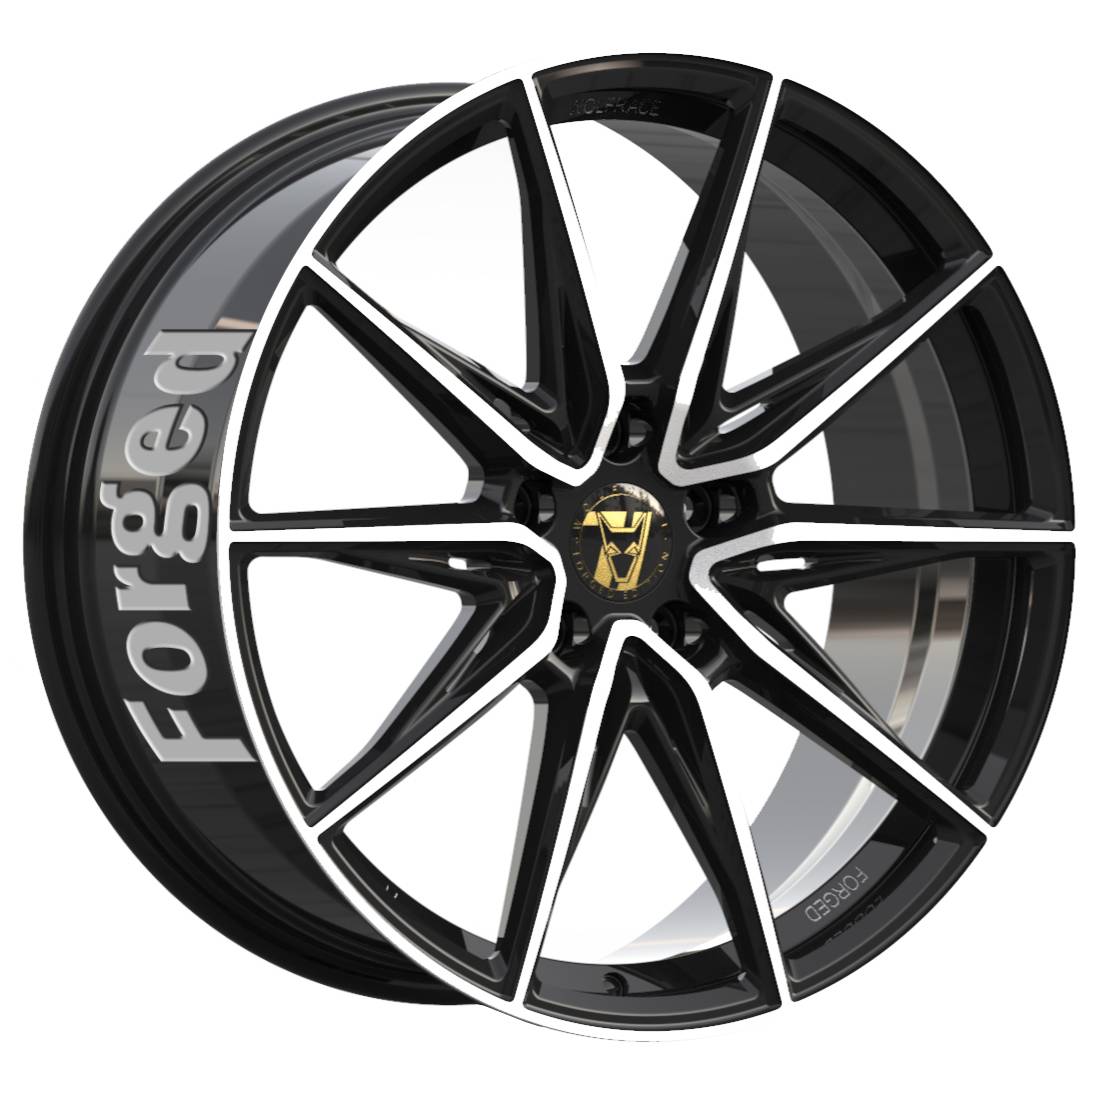 Jantes alu Demon Wheels 71 Forged Edition Urban Racer Forged [13x24] -5x114.3- ET 30